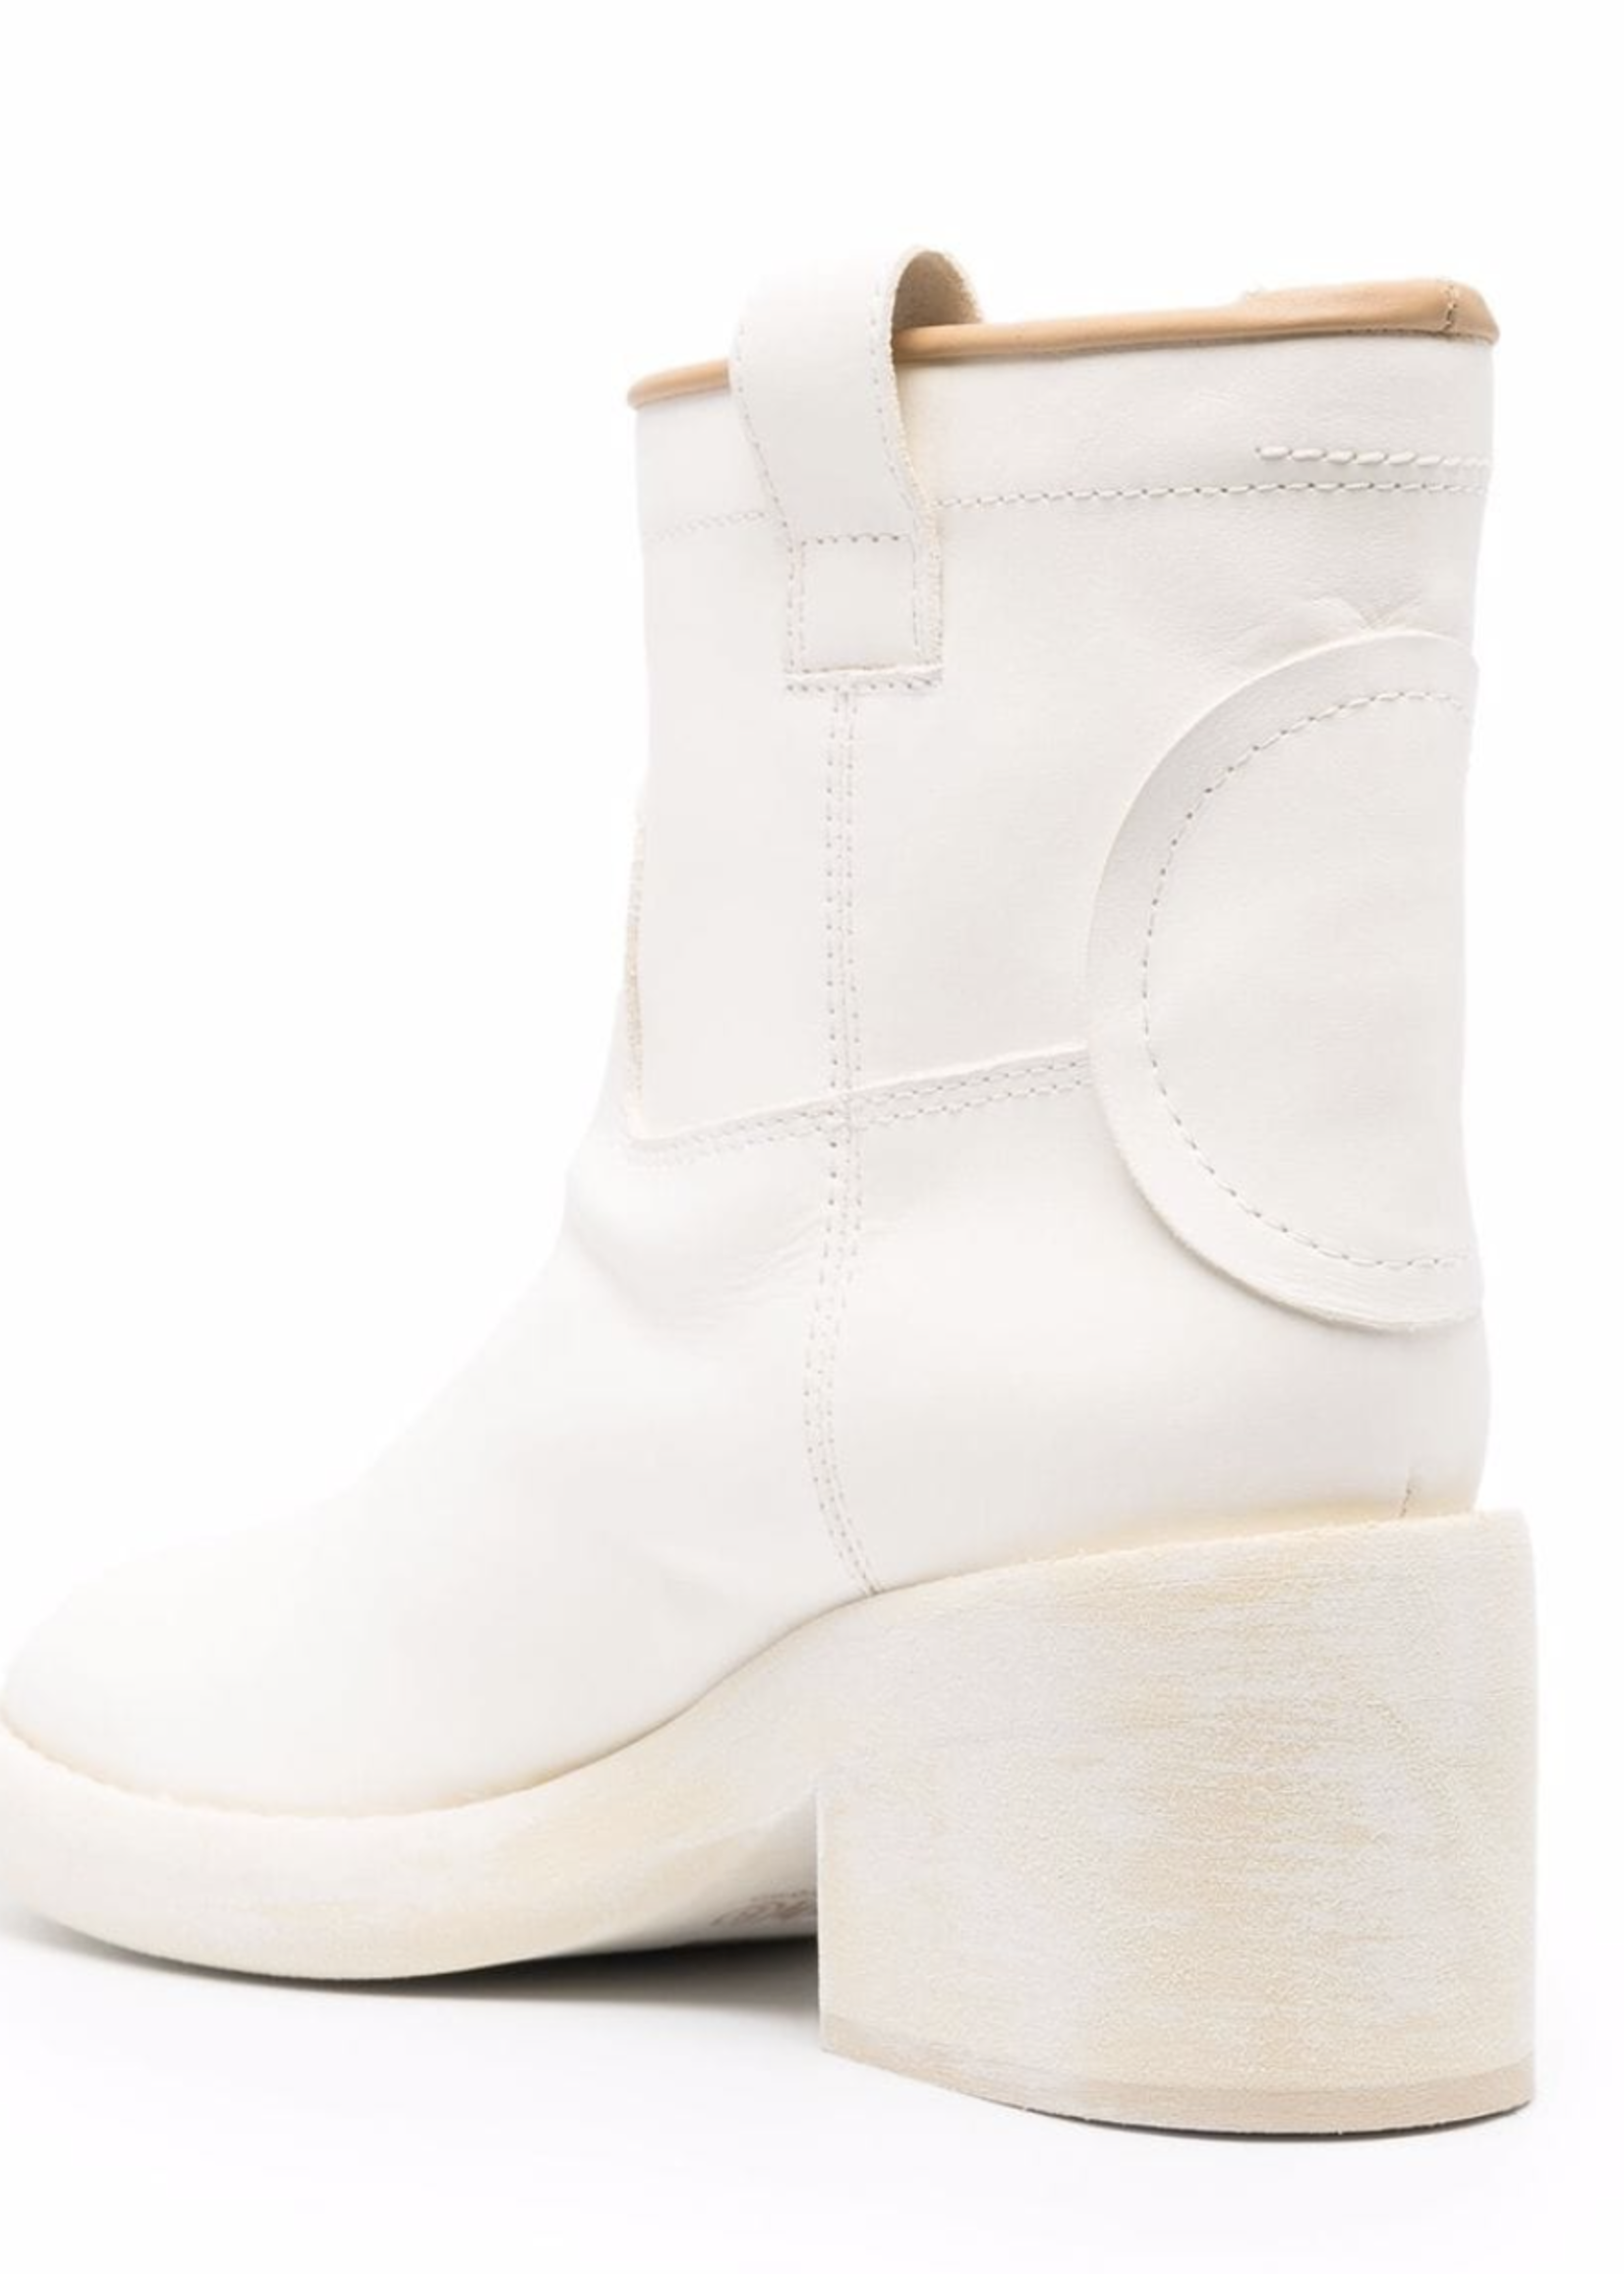 MM6 MAISON MARGIELA Biker Boot in White Painted Leather